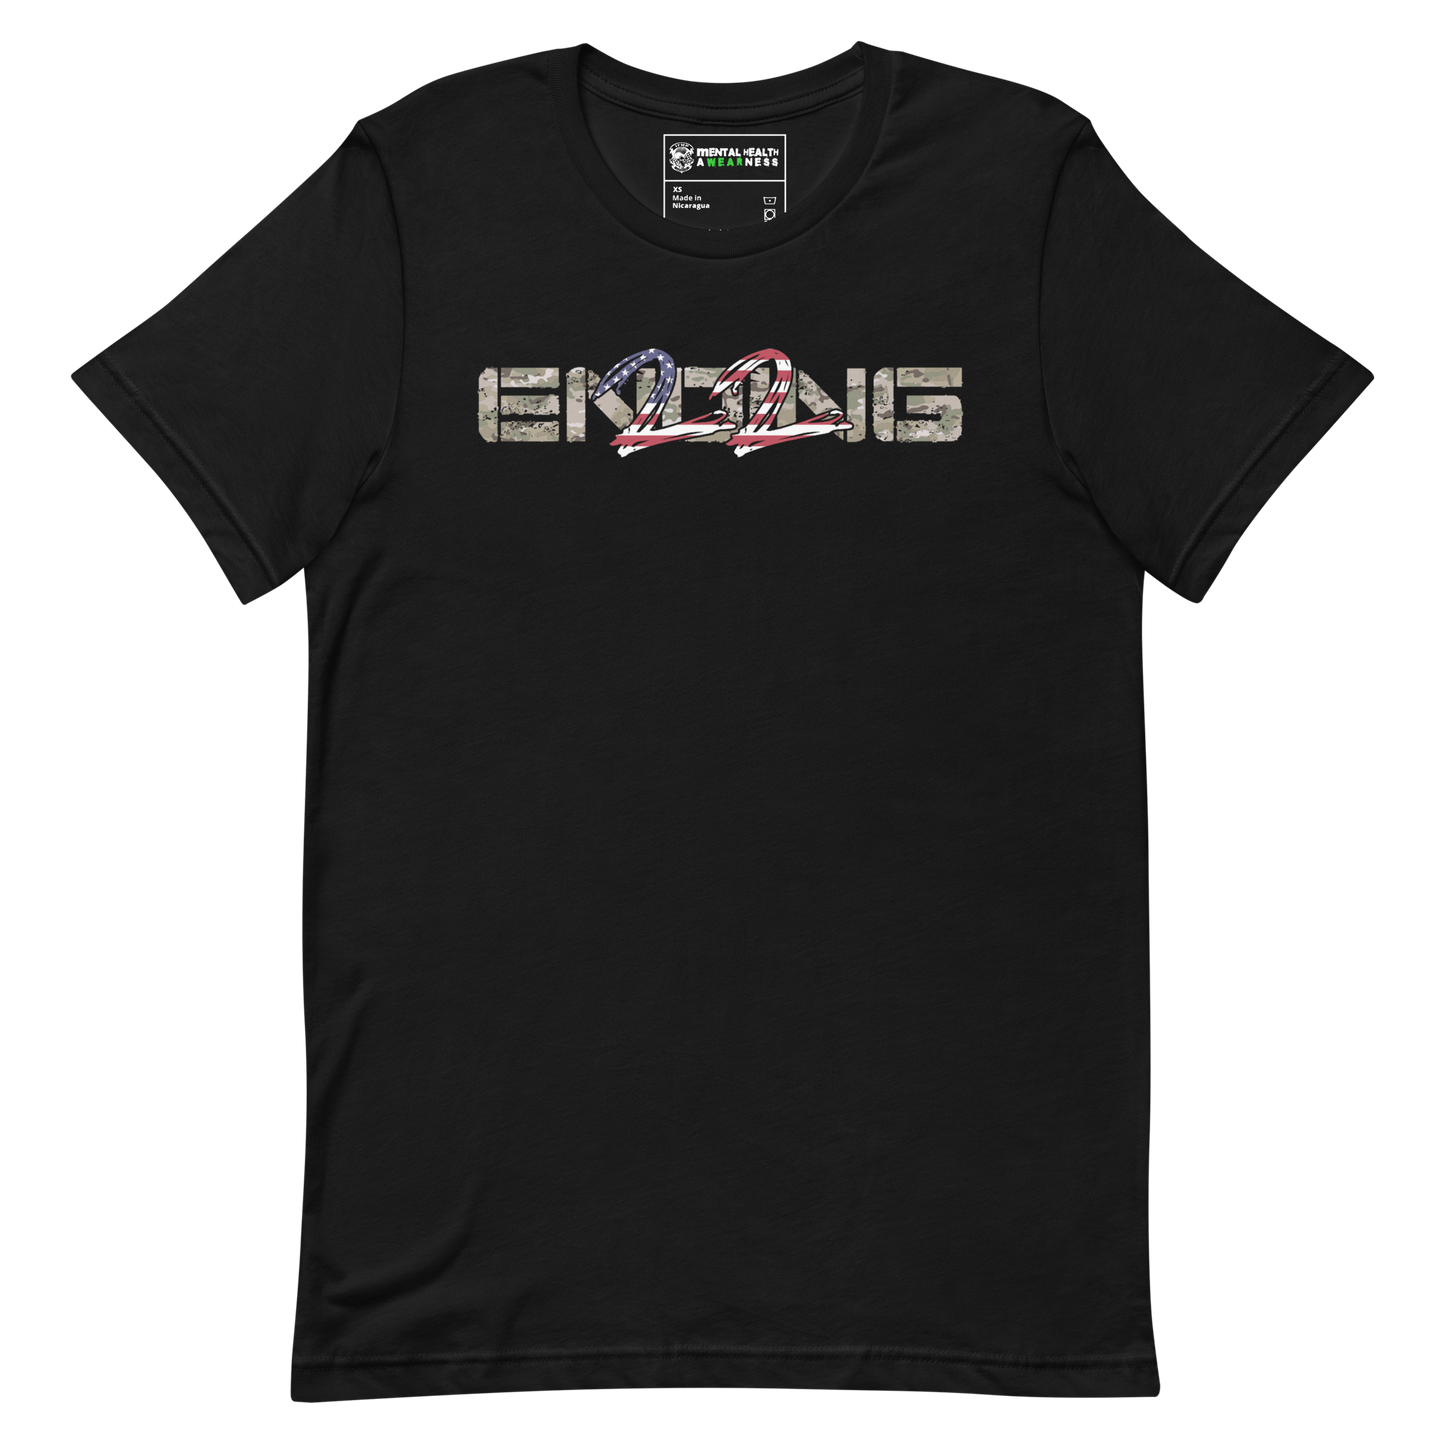 ENDING 22 Army "Grunt" Edition Black T-Shirt Front